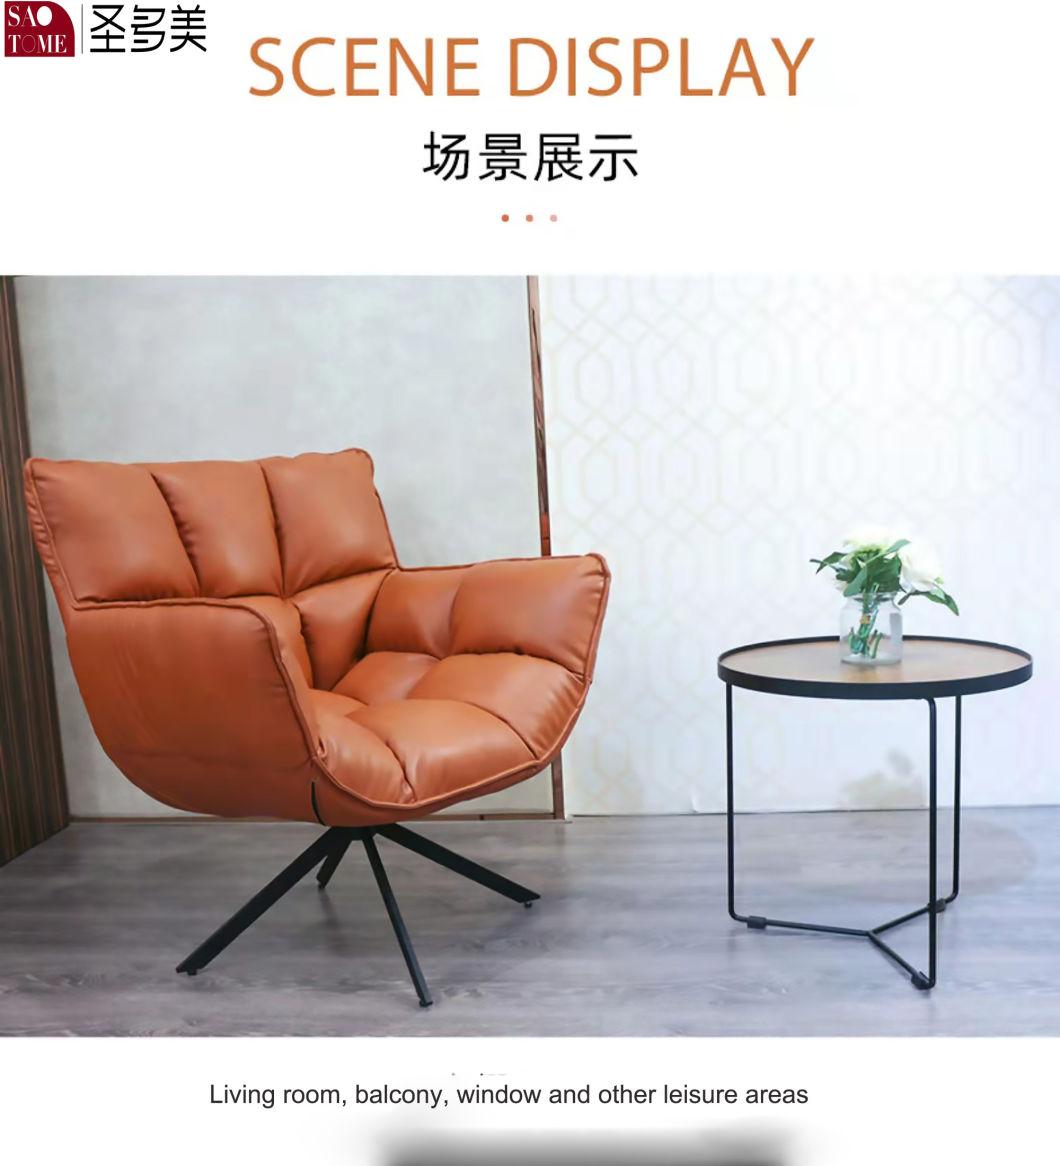 Leisure Luxury Used to Hotel Lobby Relax Area Chair